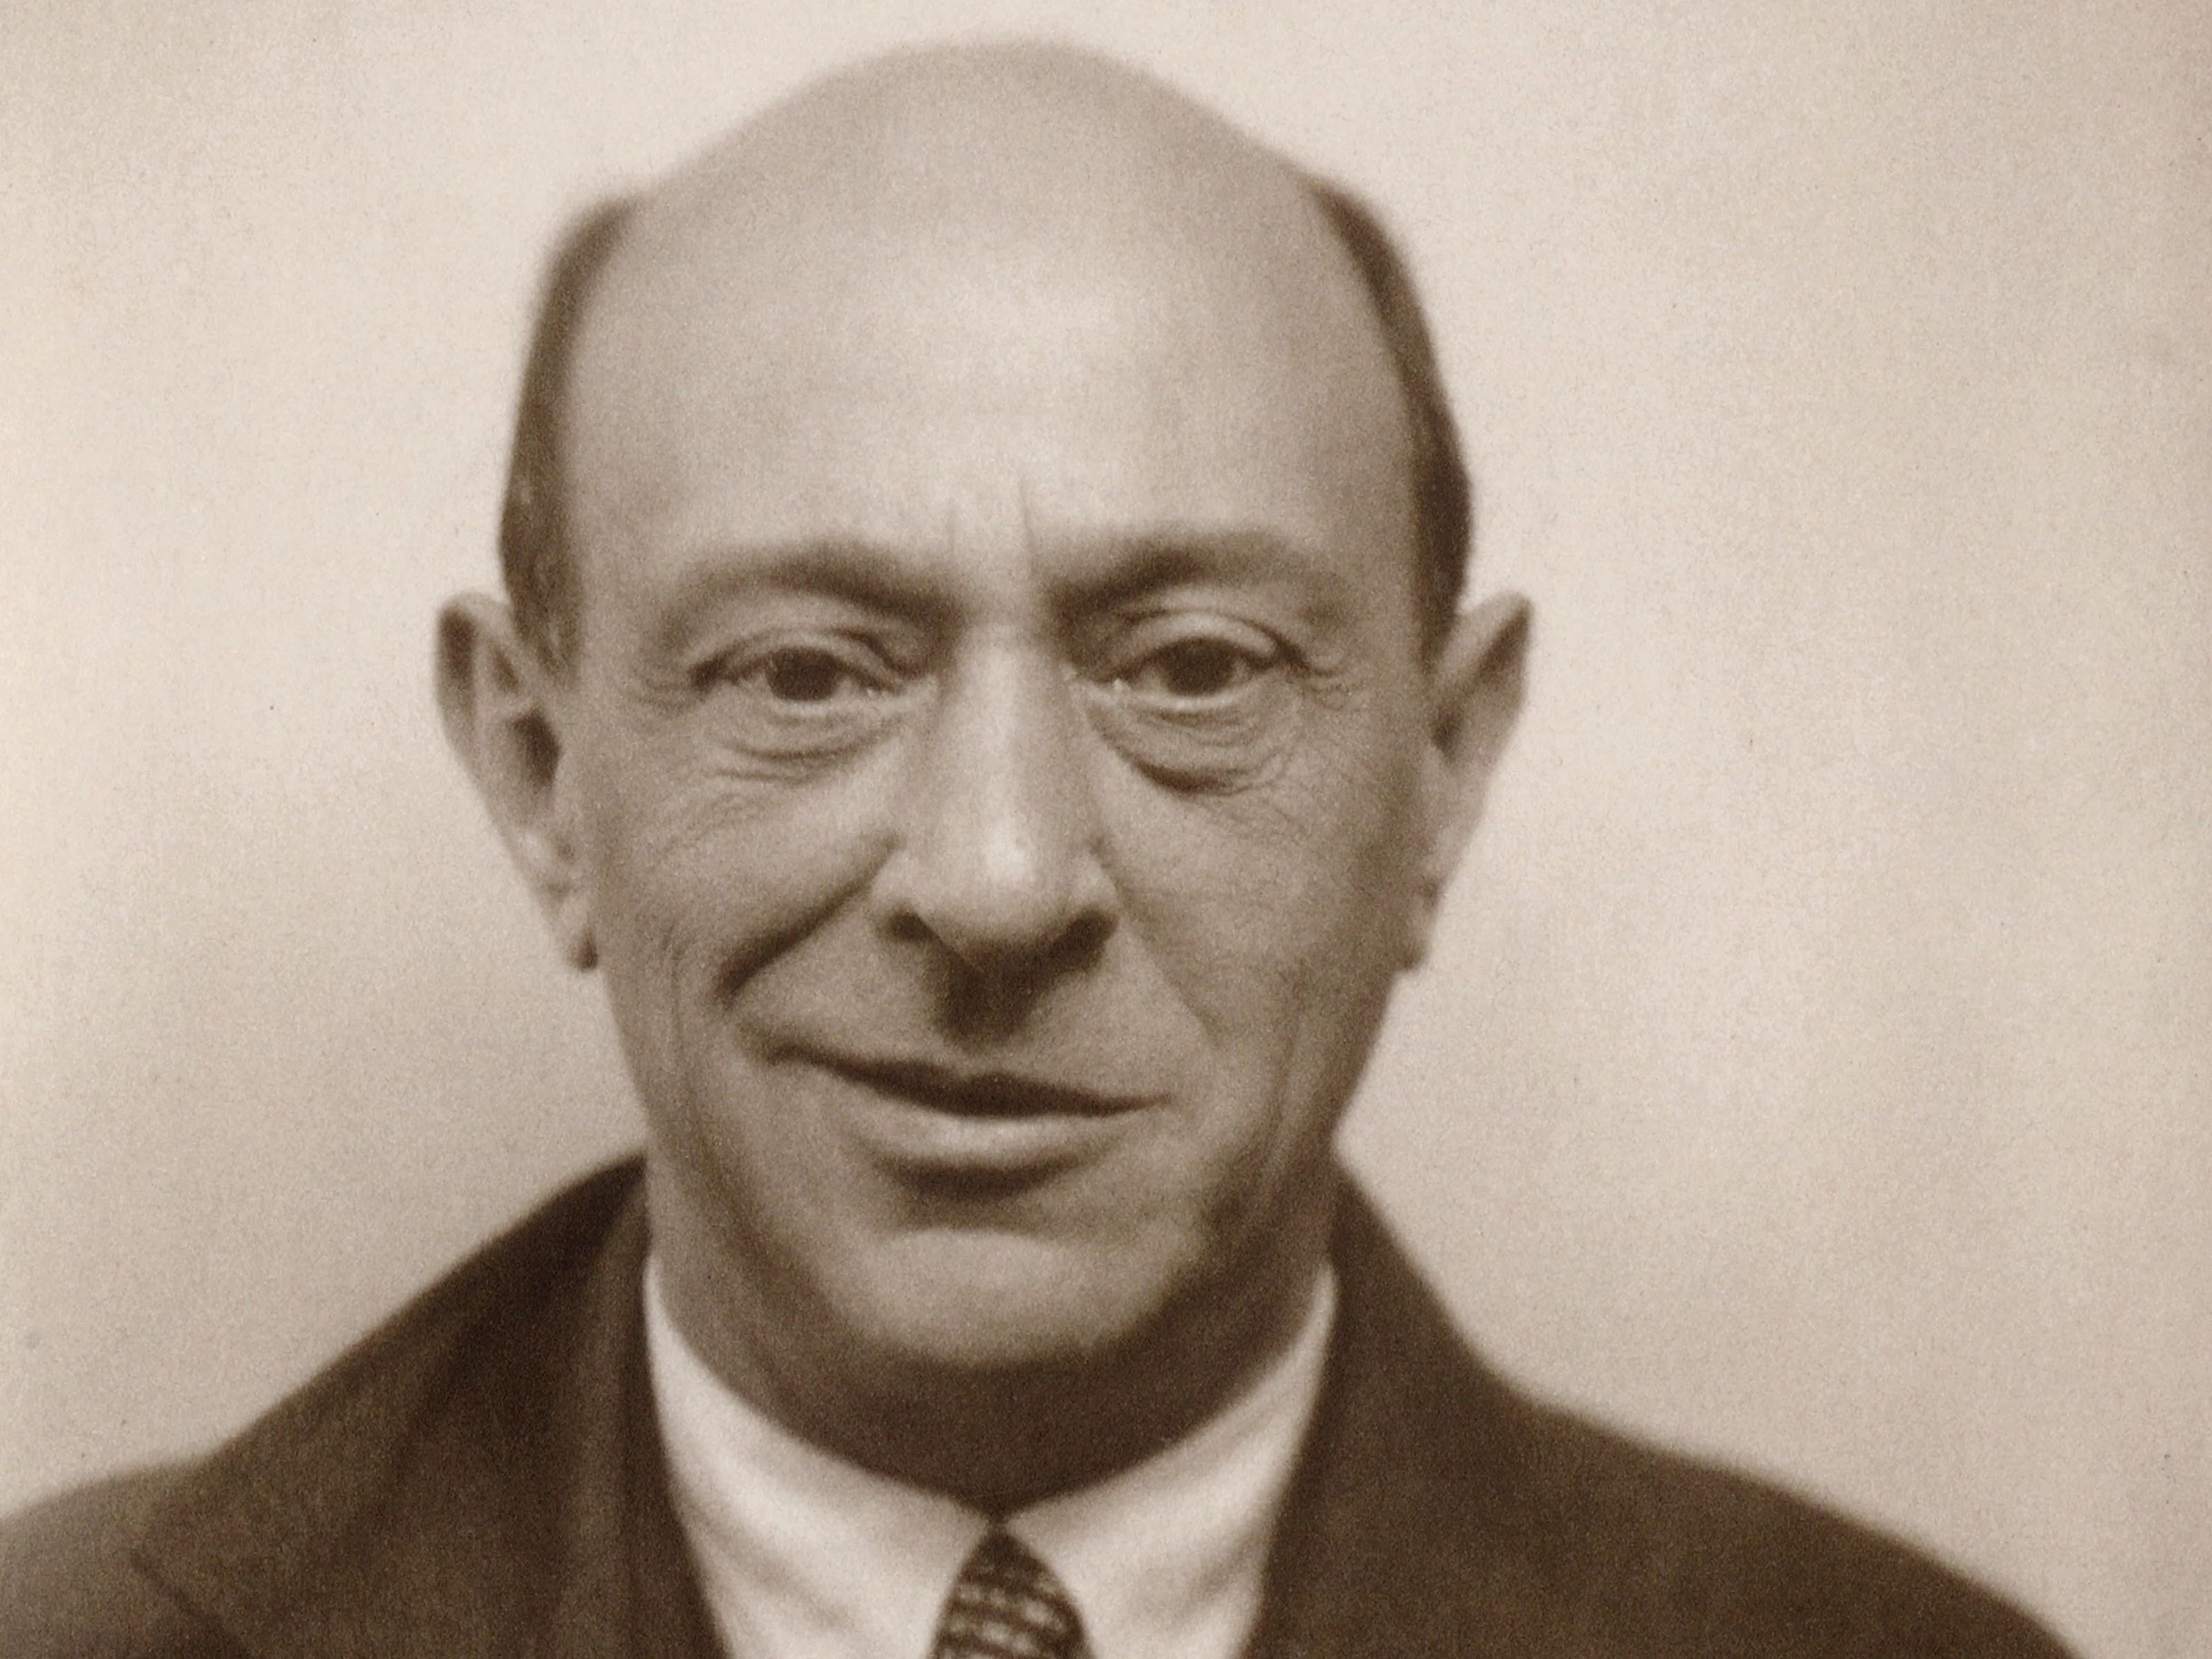 Portrait of Arnold Schoenberg. He is looking directly towards the viewer, with a half-smile.